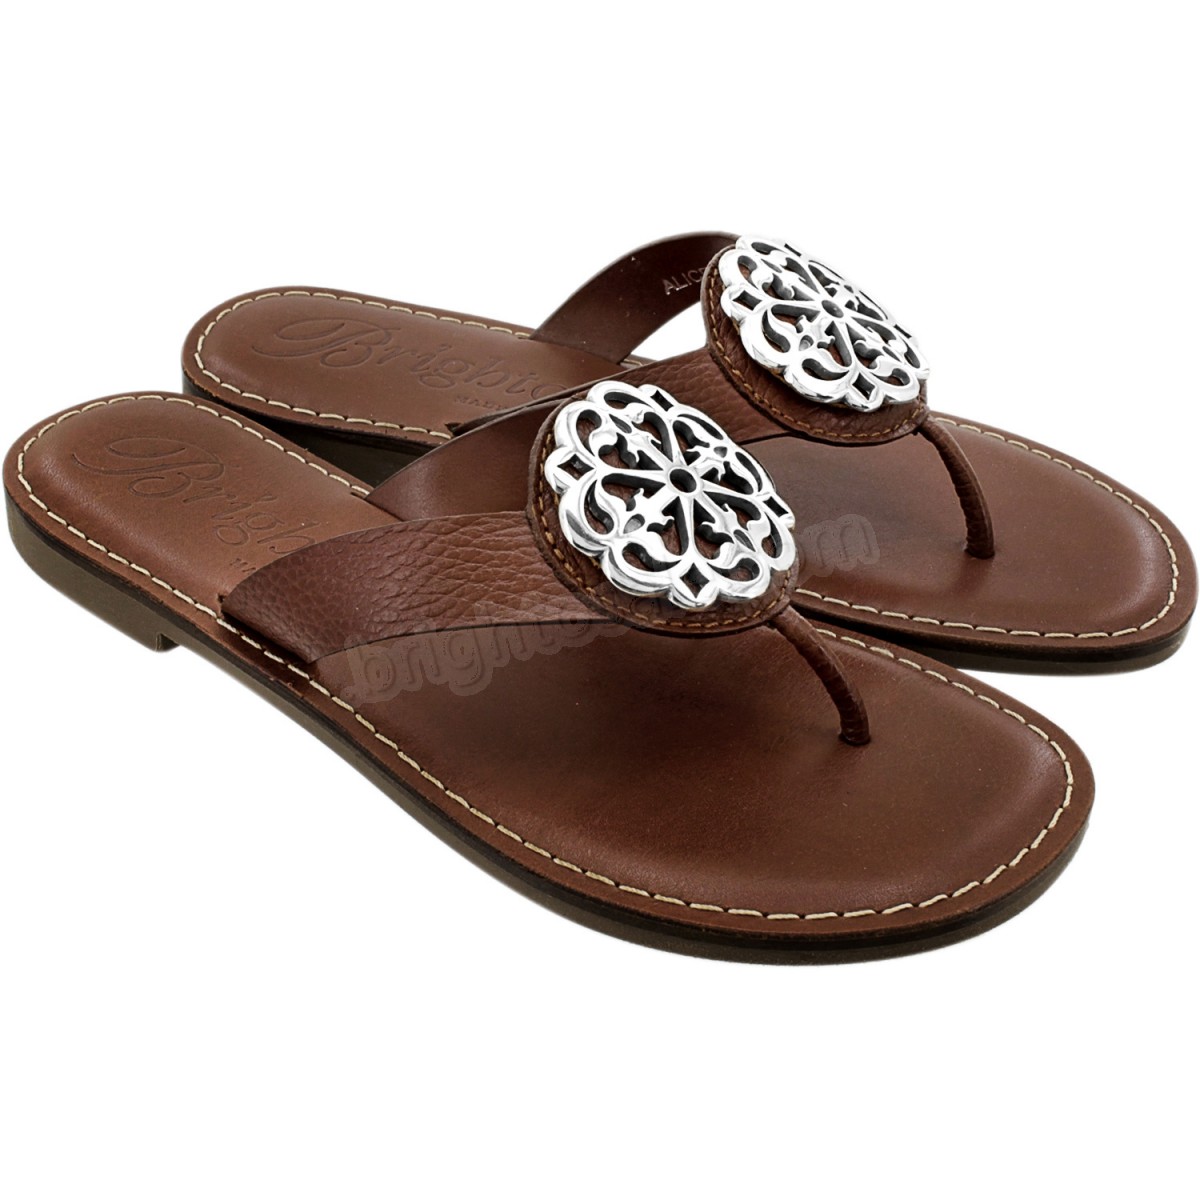 Brighton Collectibles & Online Discount Twine Woven Sandals - -5